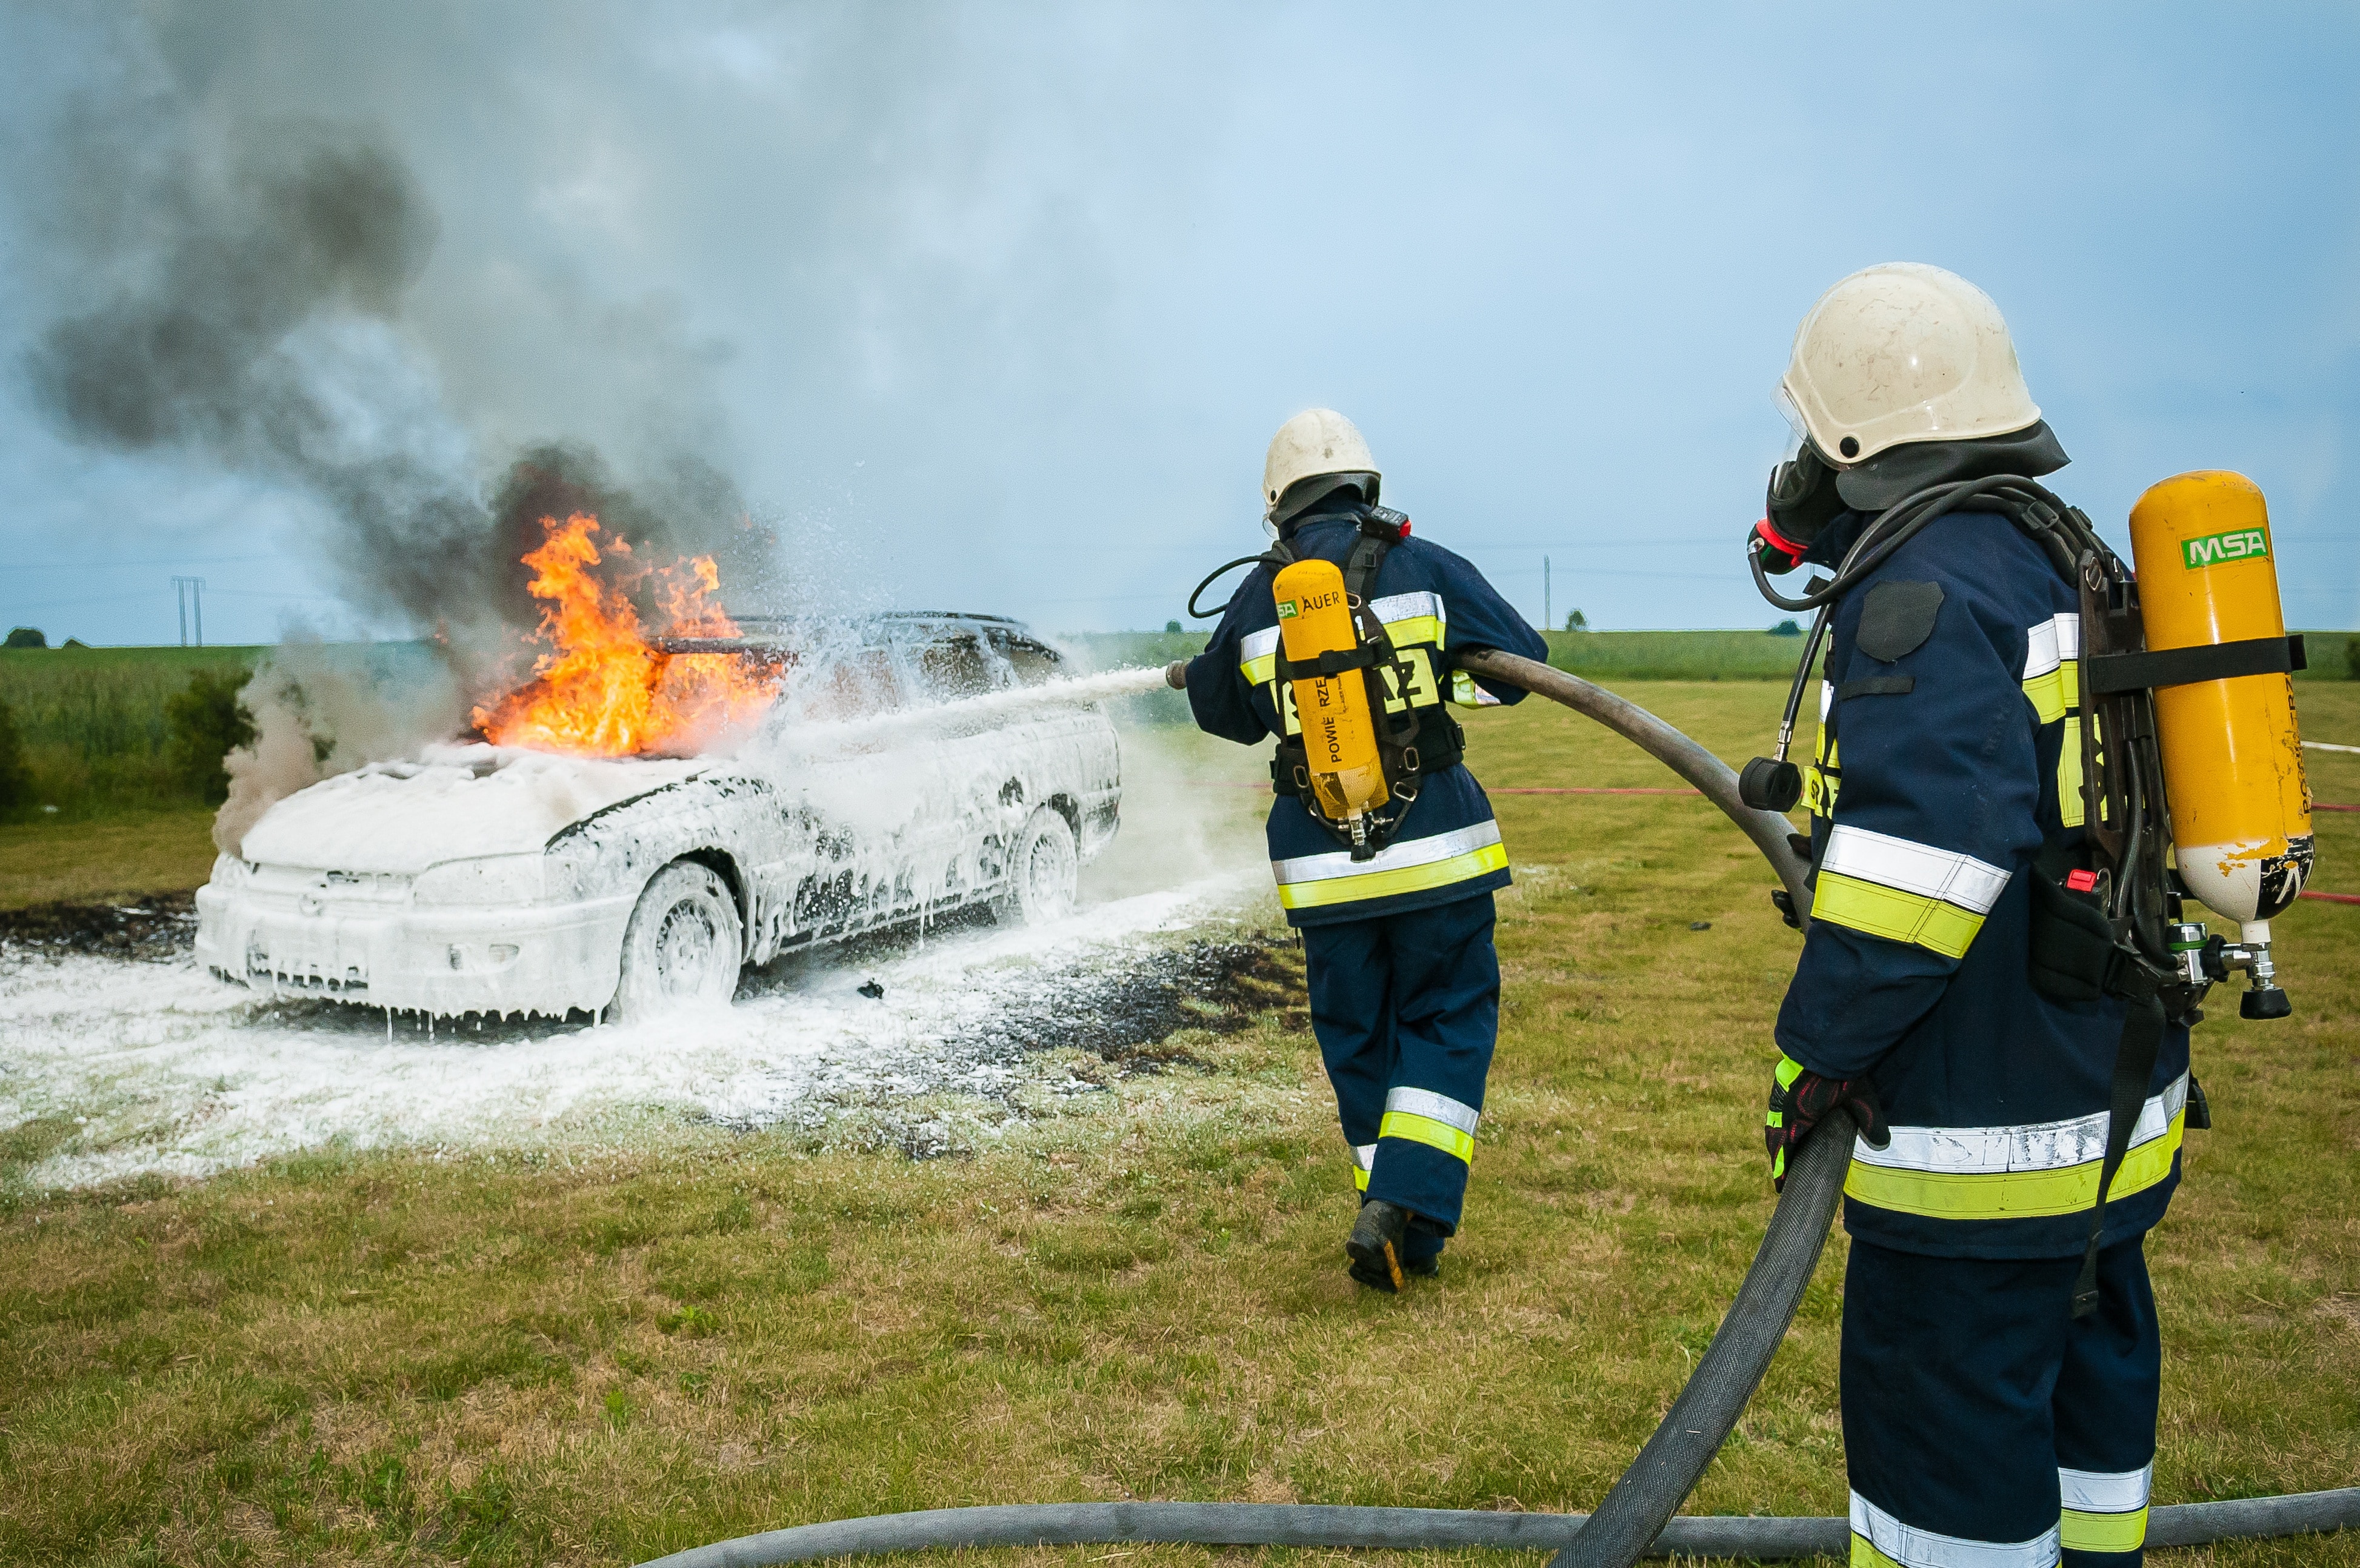 two firemen extinguished the car